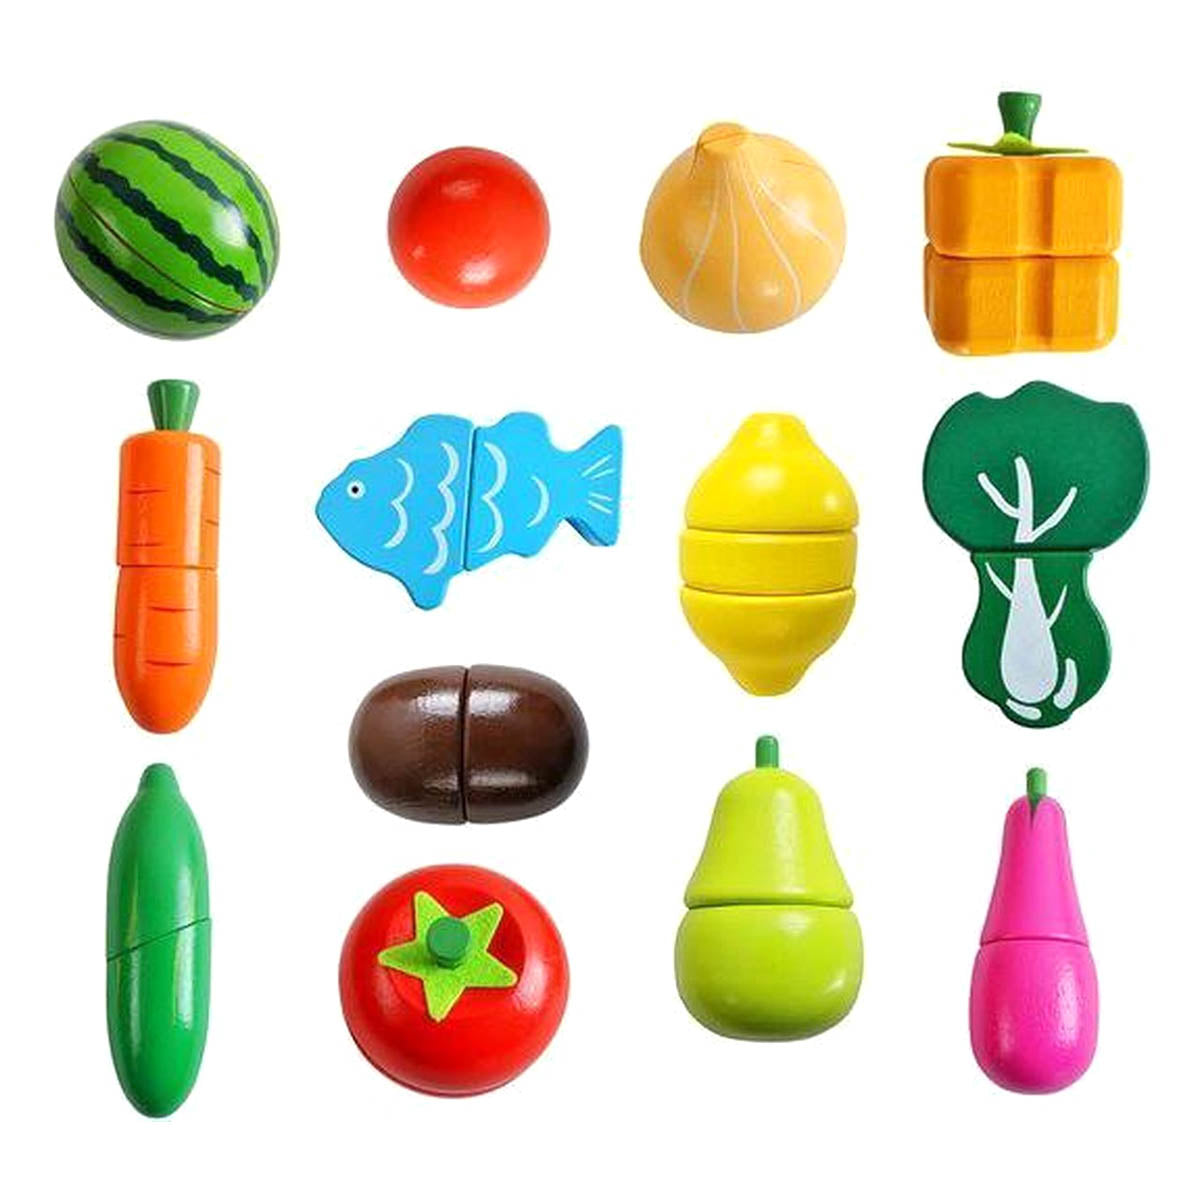 <tc>Ariko</tc> Wooden Toy set fruit and vegetables - 17 pieces - kitchen accessories - Shop toys - Toy food - Toy fruit wood